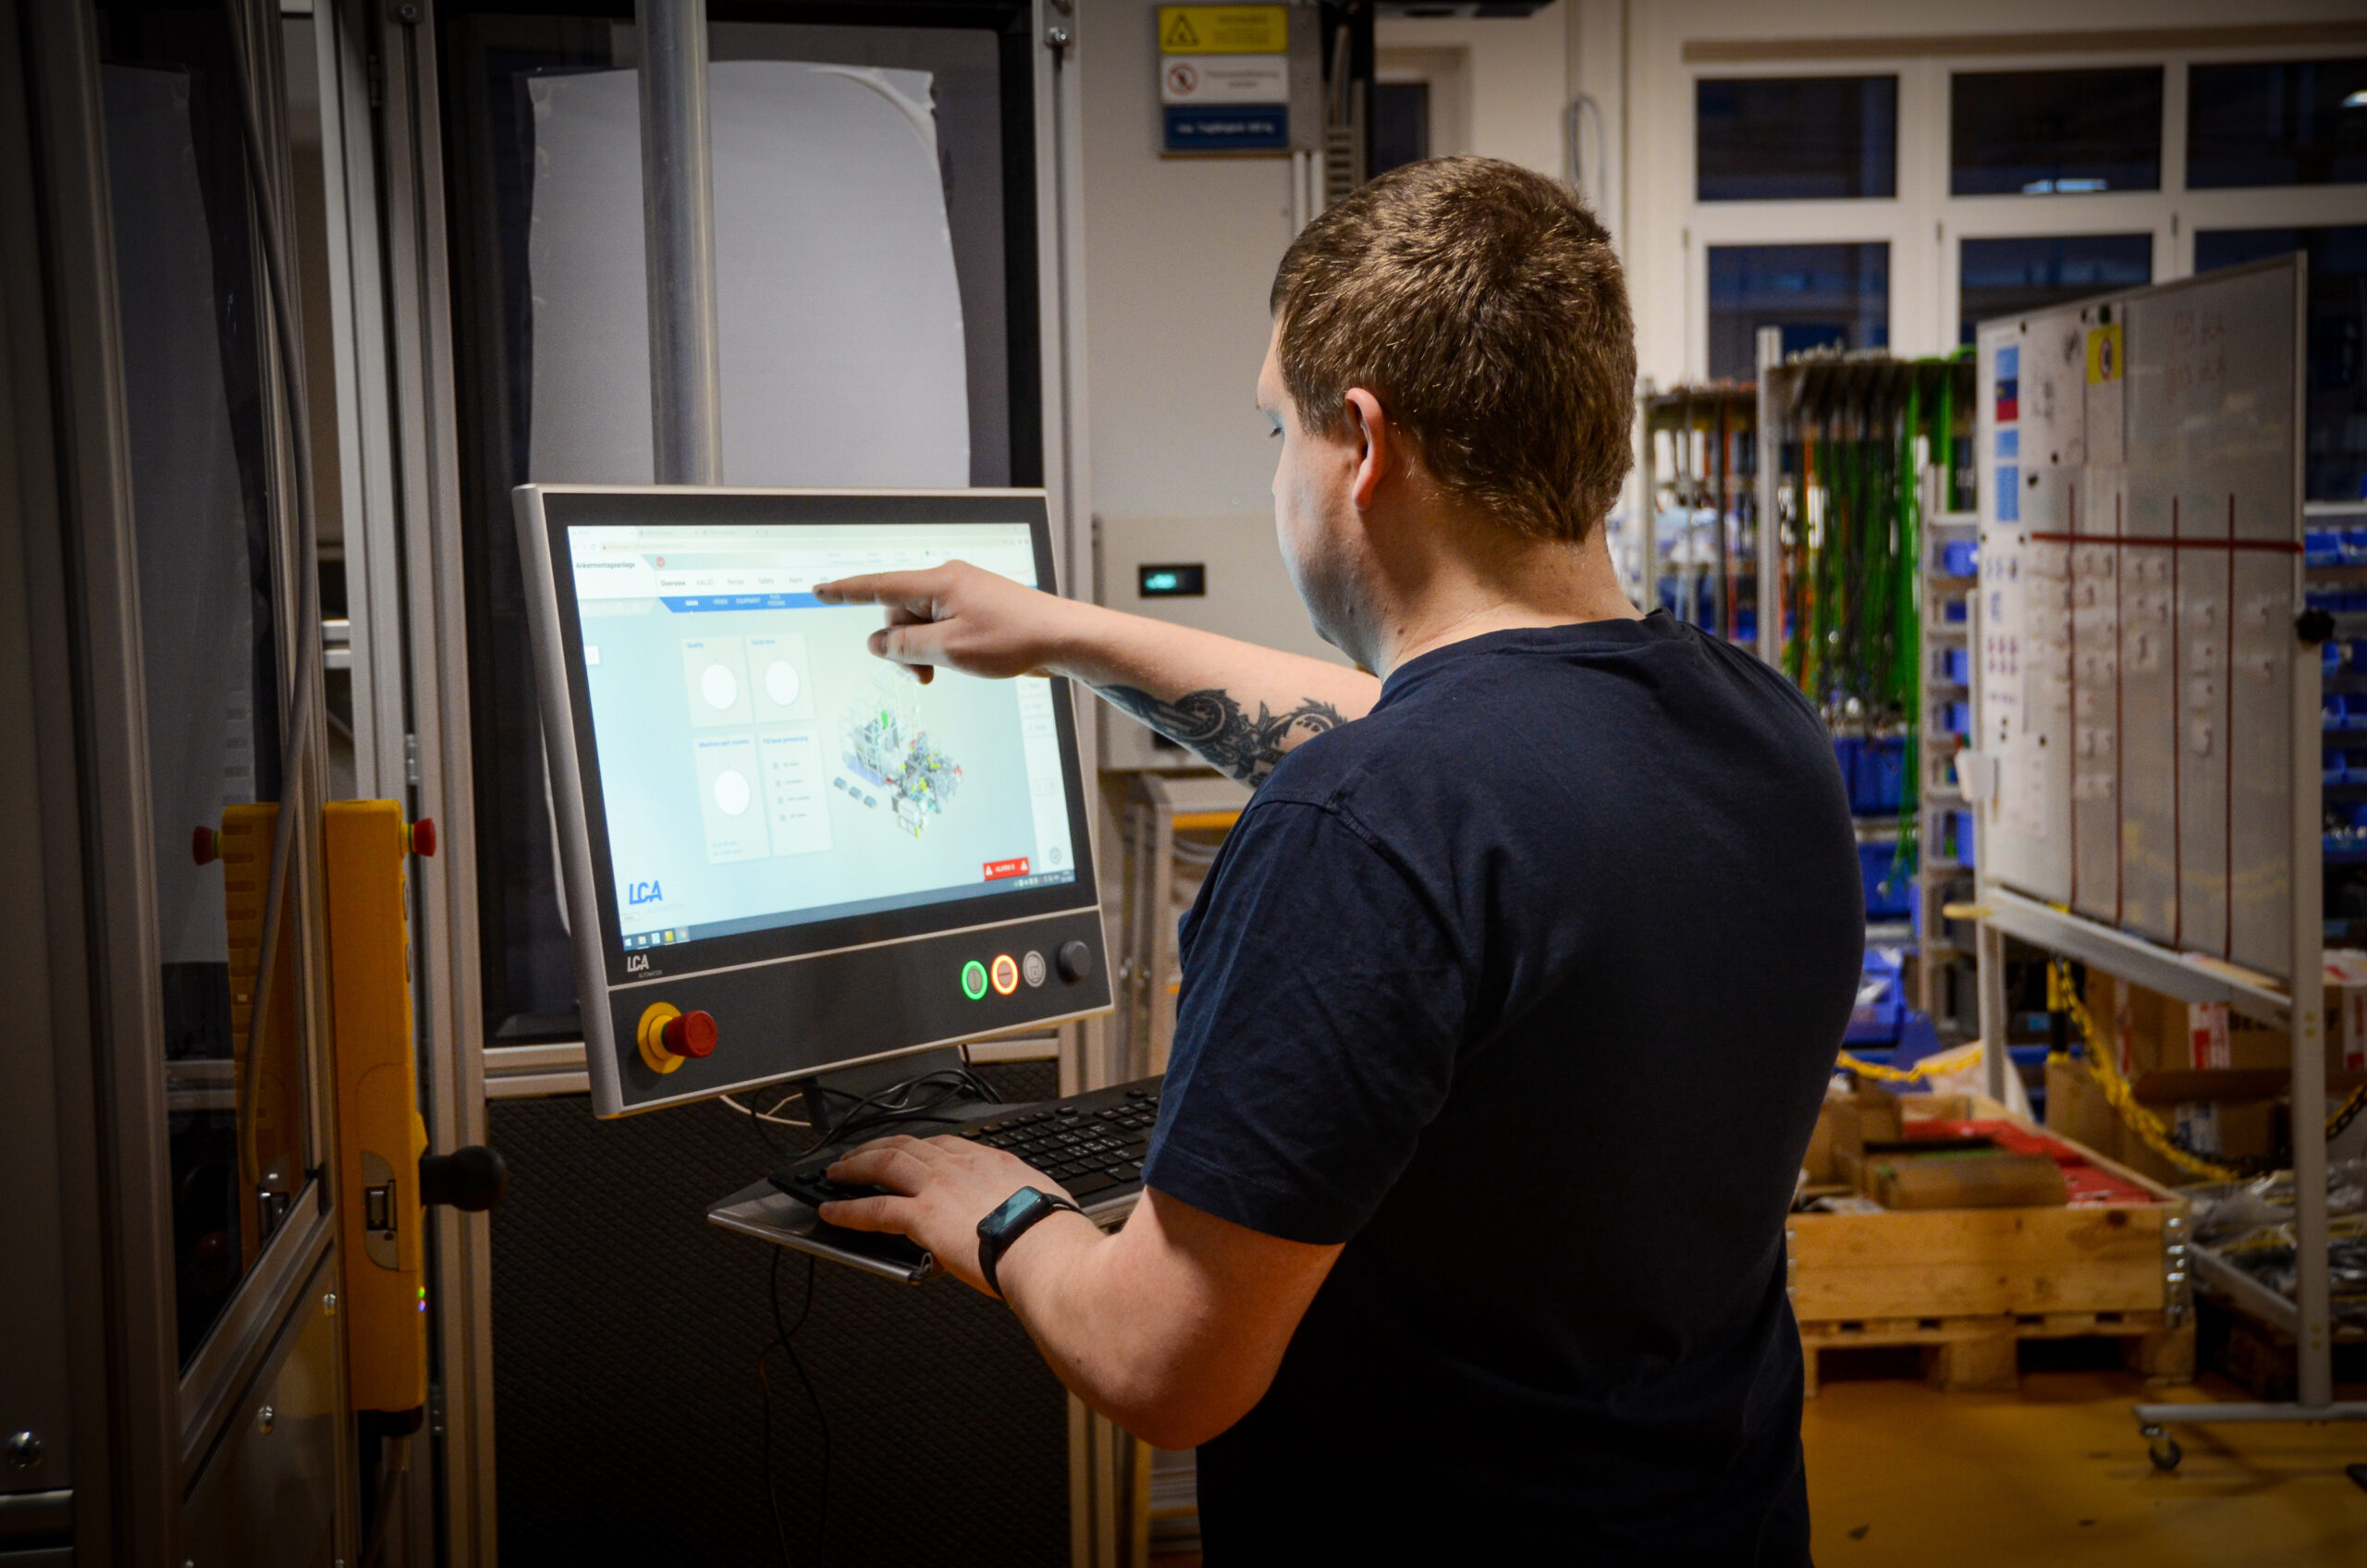 Our machines are built to be understood: Our HMIs offer the operator easy solutions, when problems occur.